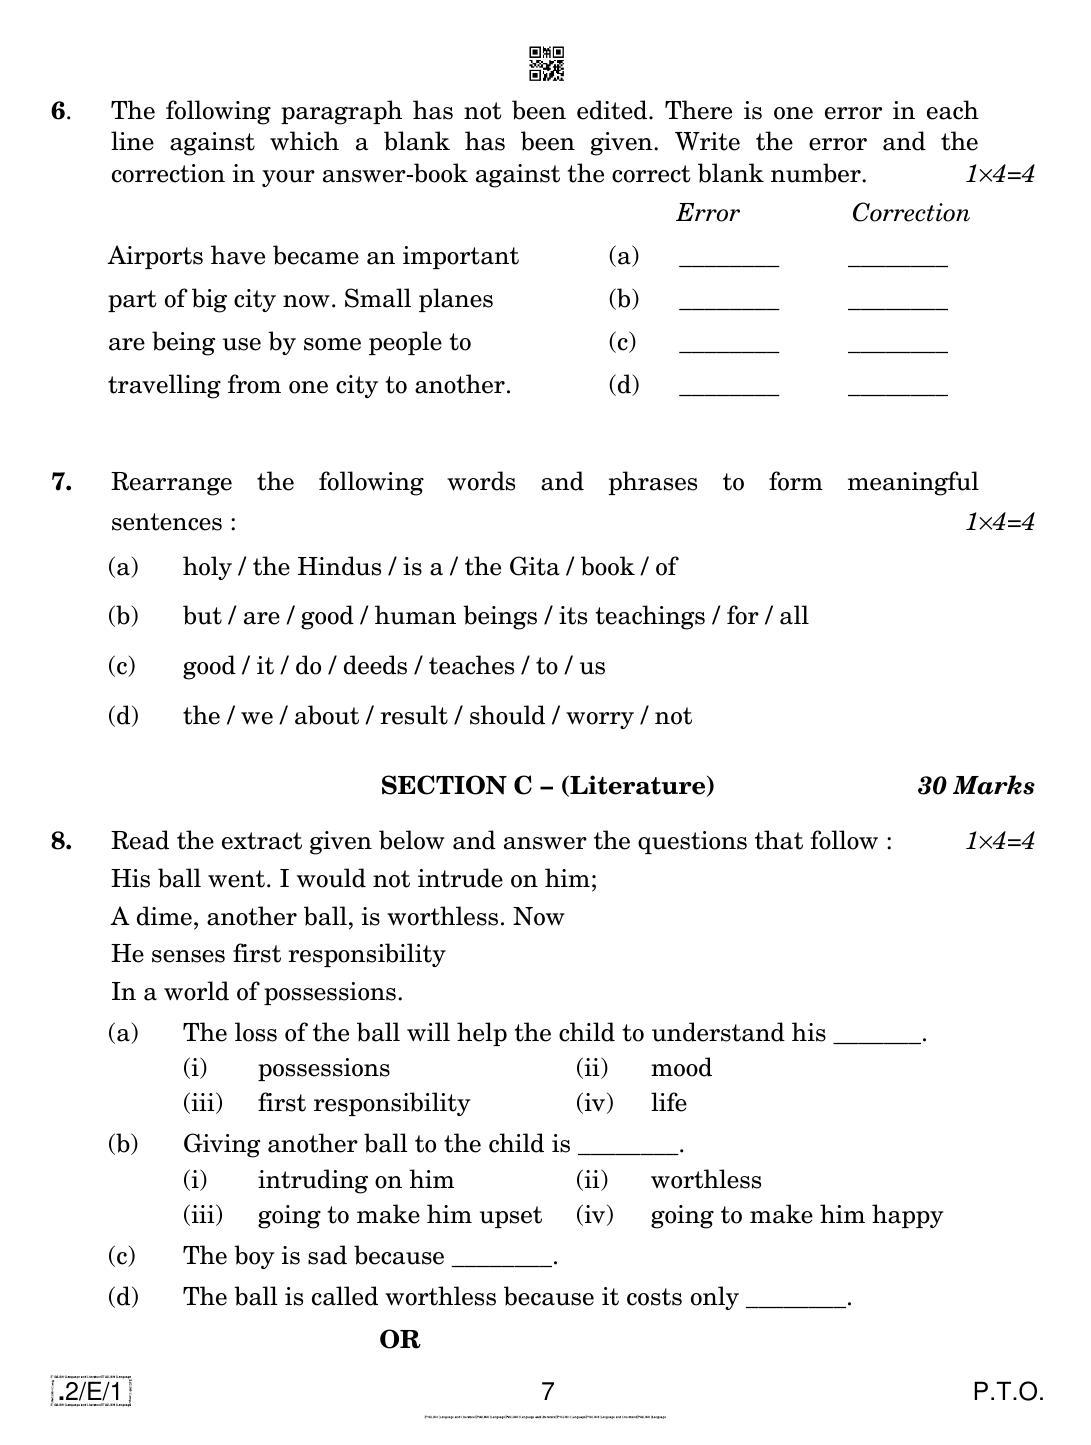 CBSE Class 10 2-C-1 Eng Lang. And Literature 2020 Compartment Question Paper - Page 7